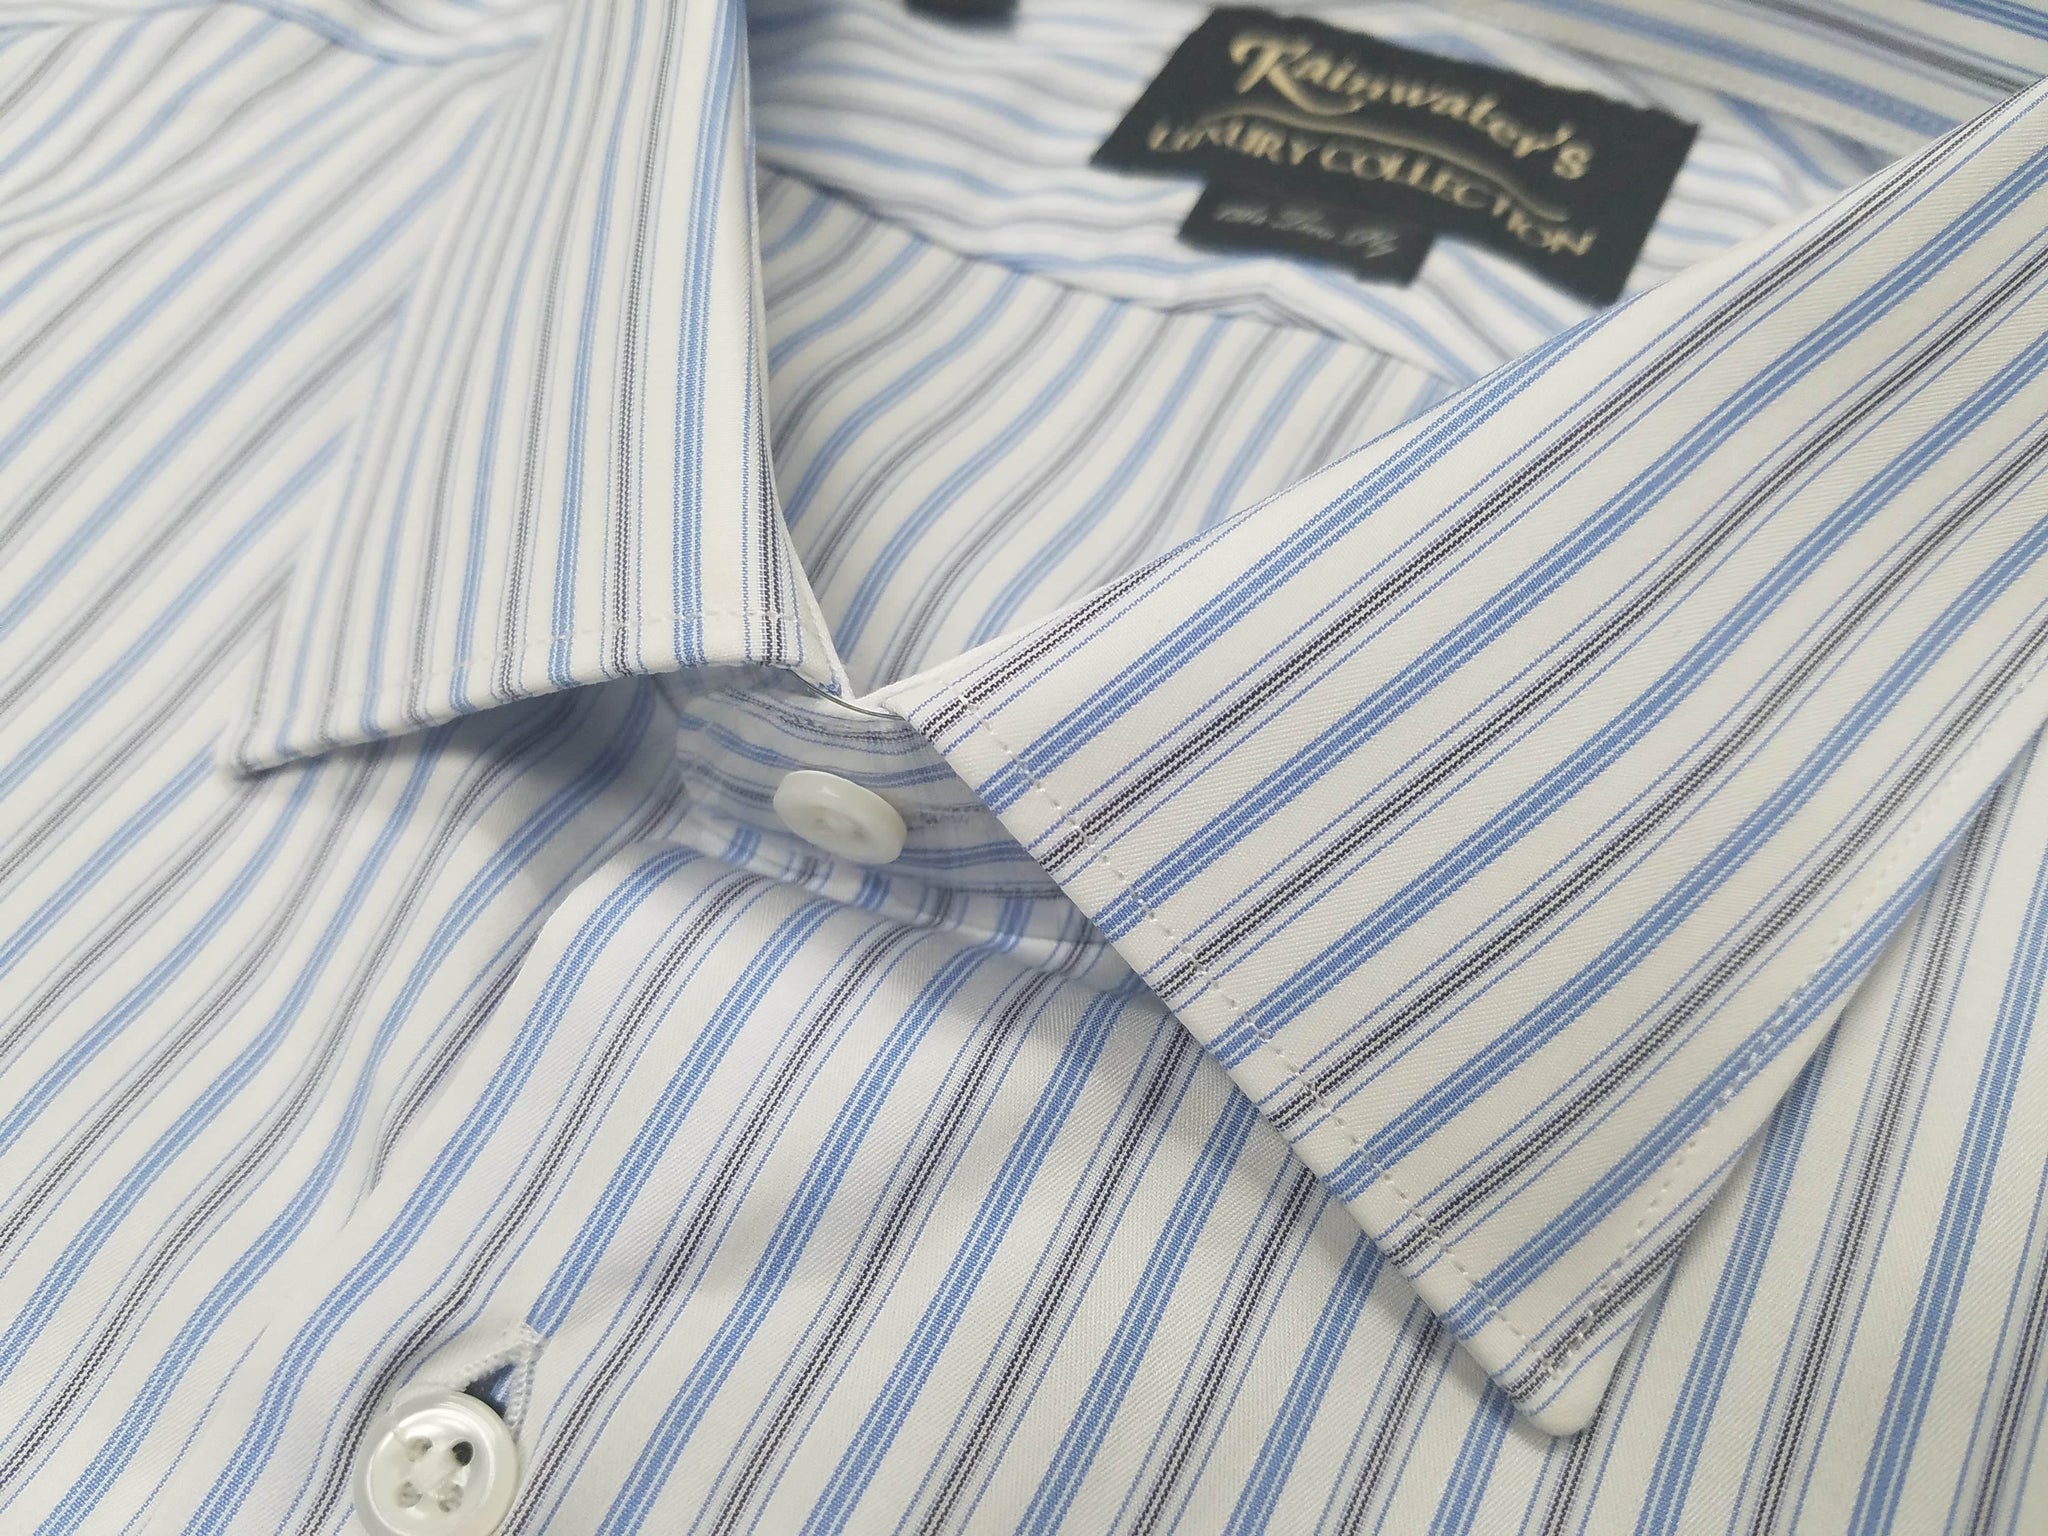 Rainwater's Luxury Collection White with Blue and Grey Stripe Dress Shirt - Rainwater's Men's Clothing and Tuxedo Rental